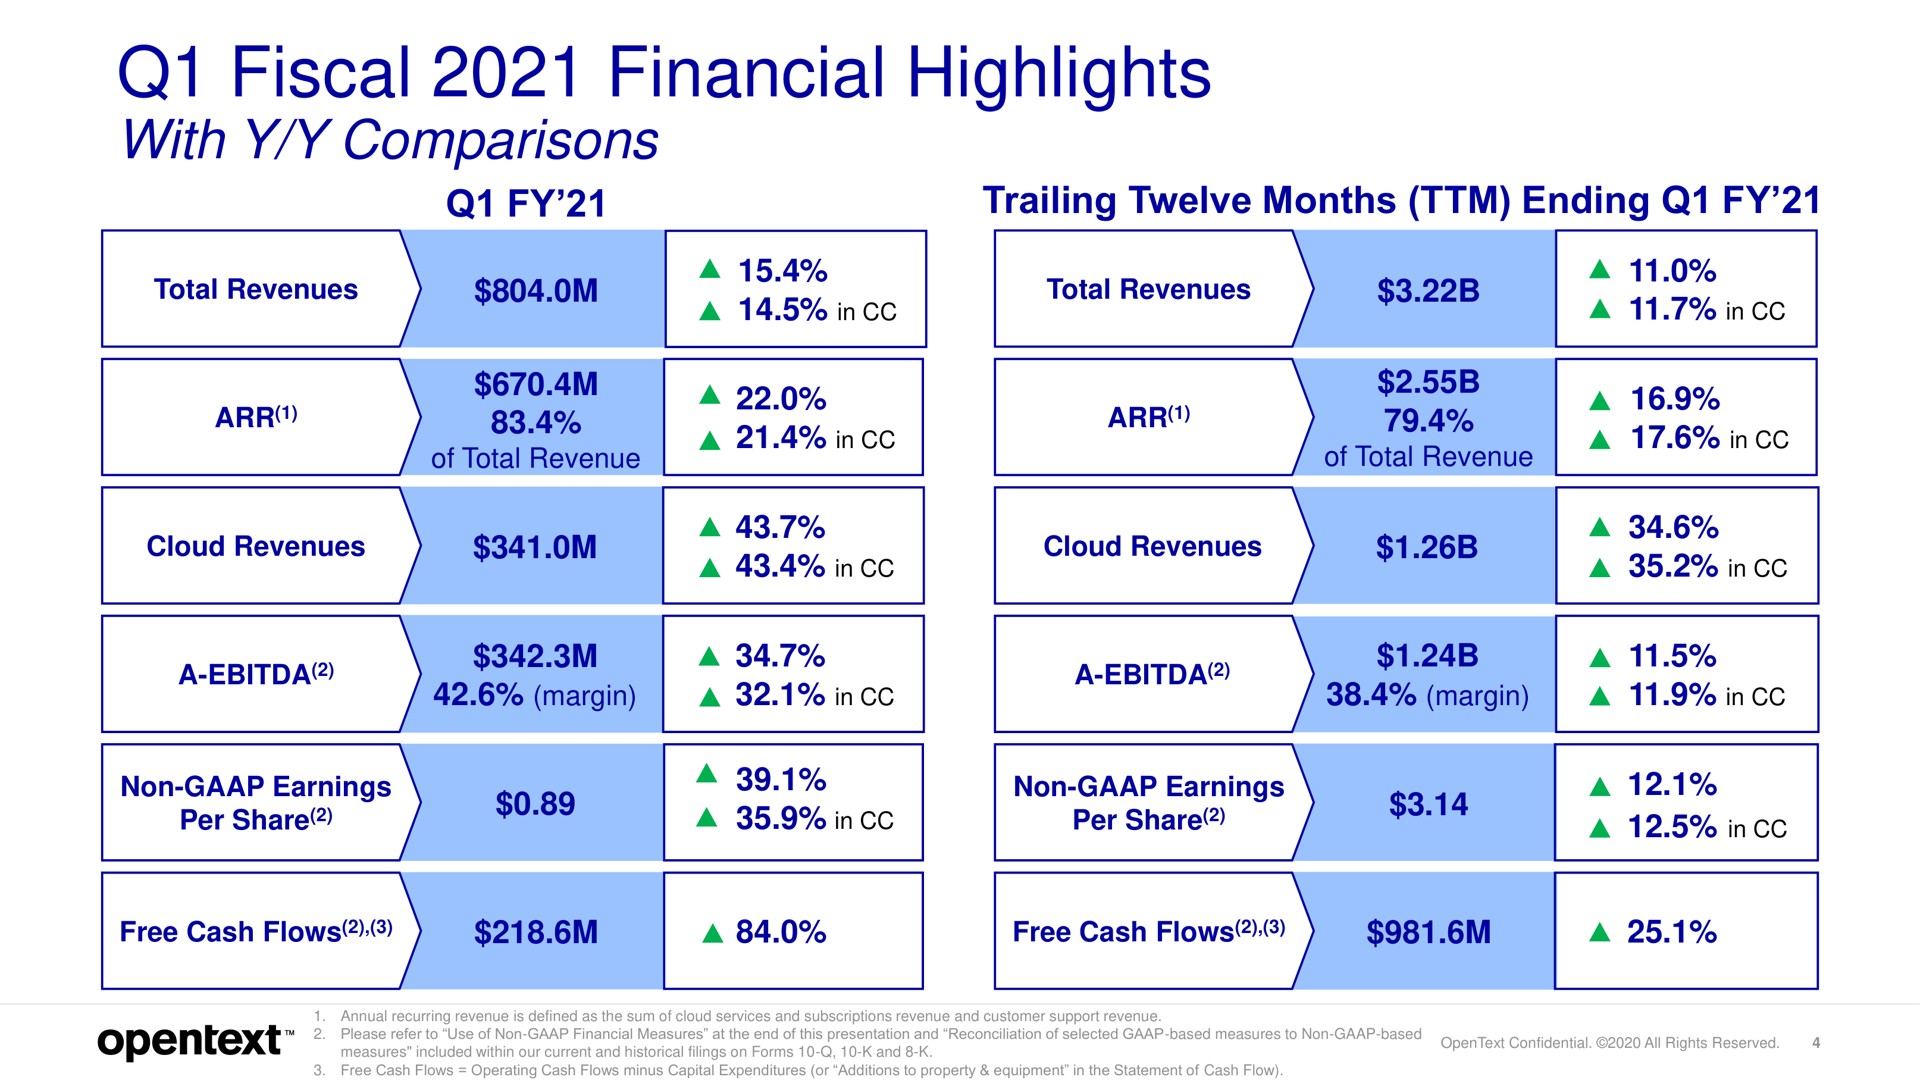 fiscal financial highlights with comparisons | OpenText